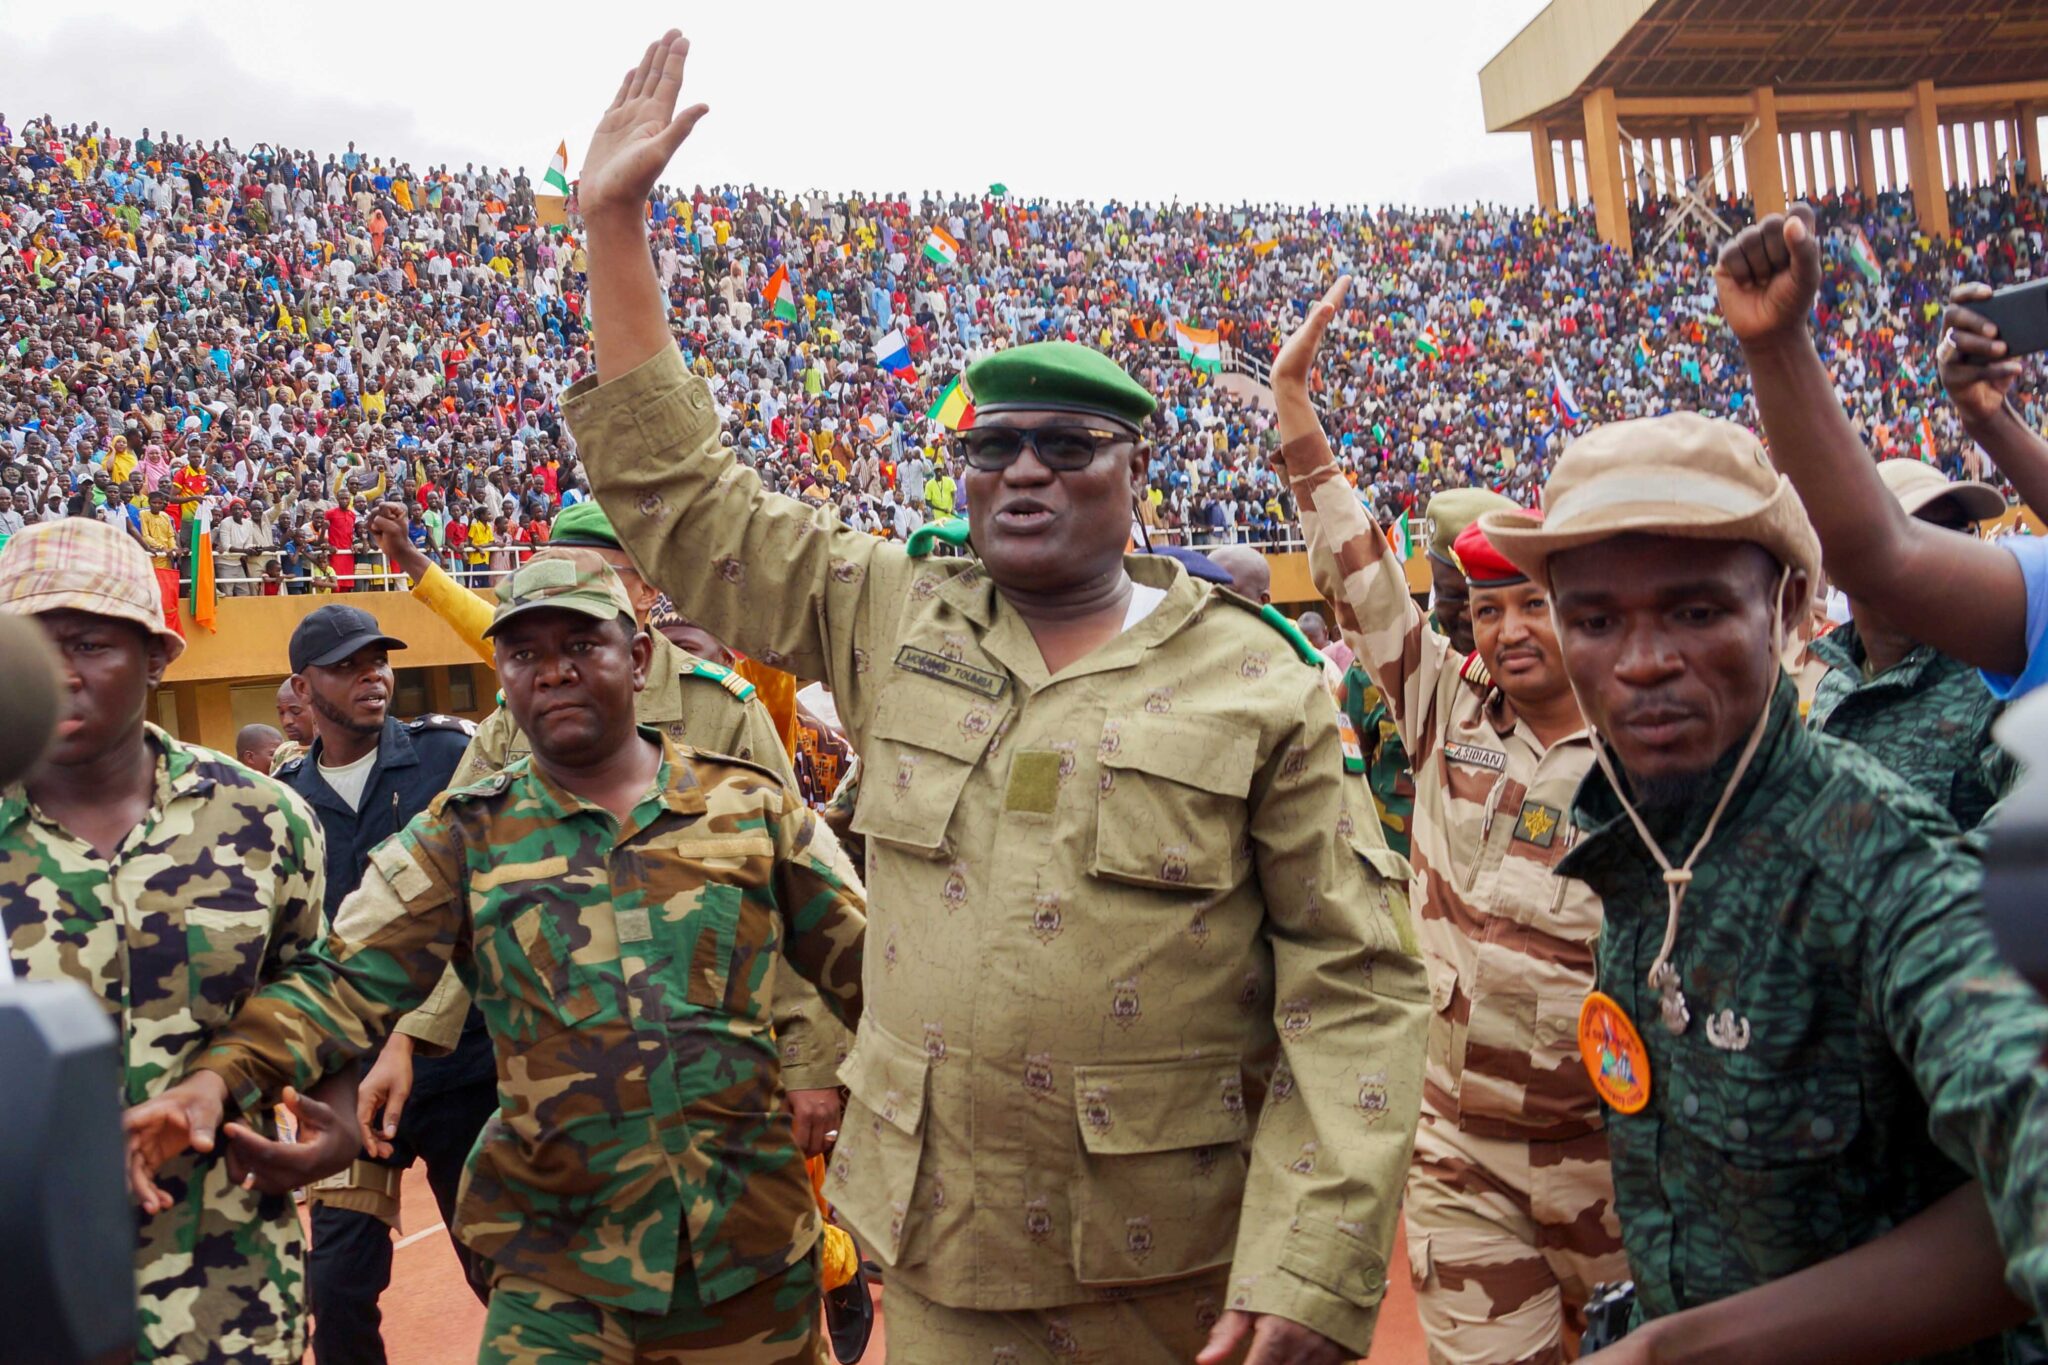 Mohamed Toumba, one of the leading figures in Niger's military government, at a massive rally with supporters. Photo: Balima Boreima/Anadolu Agency via Getty Images.